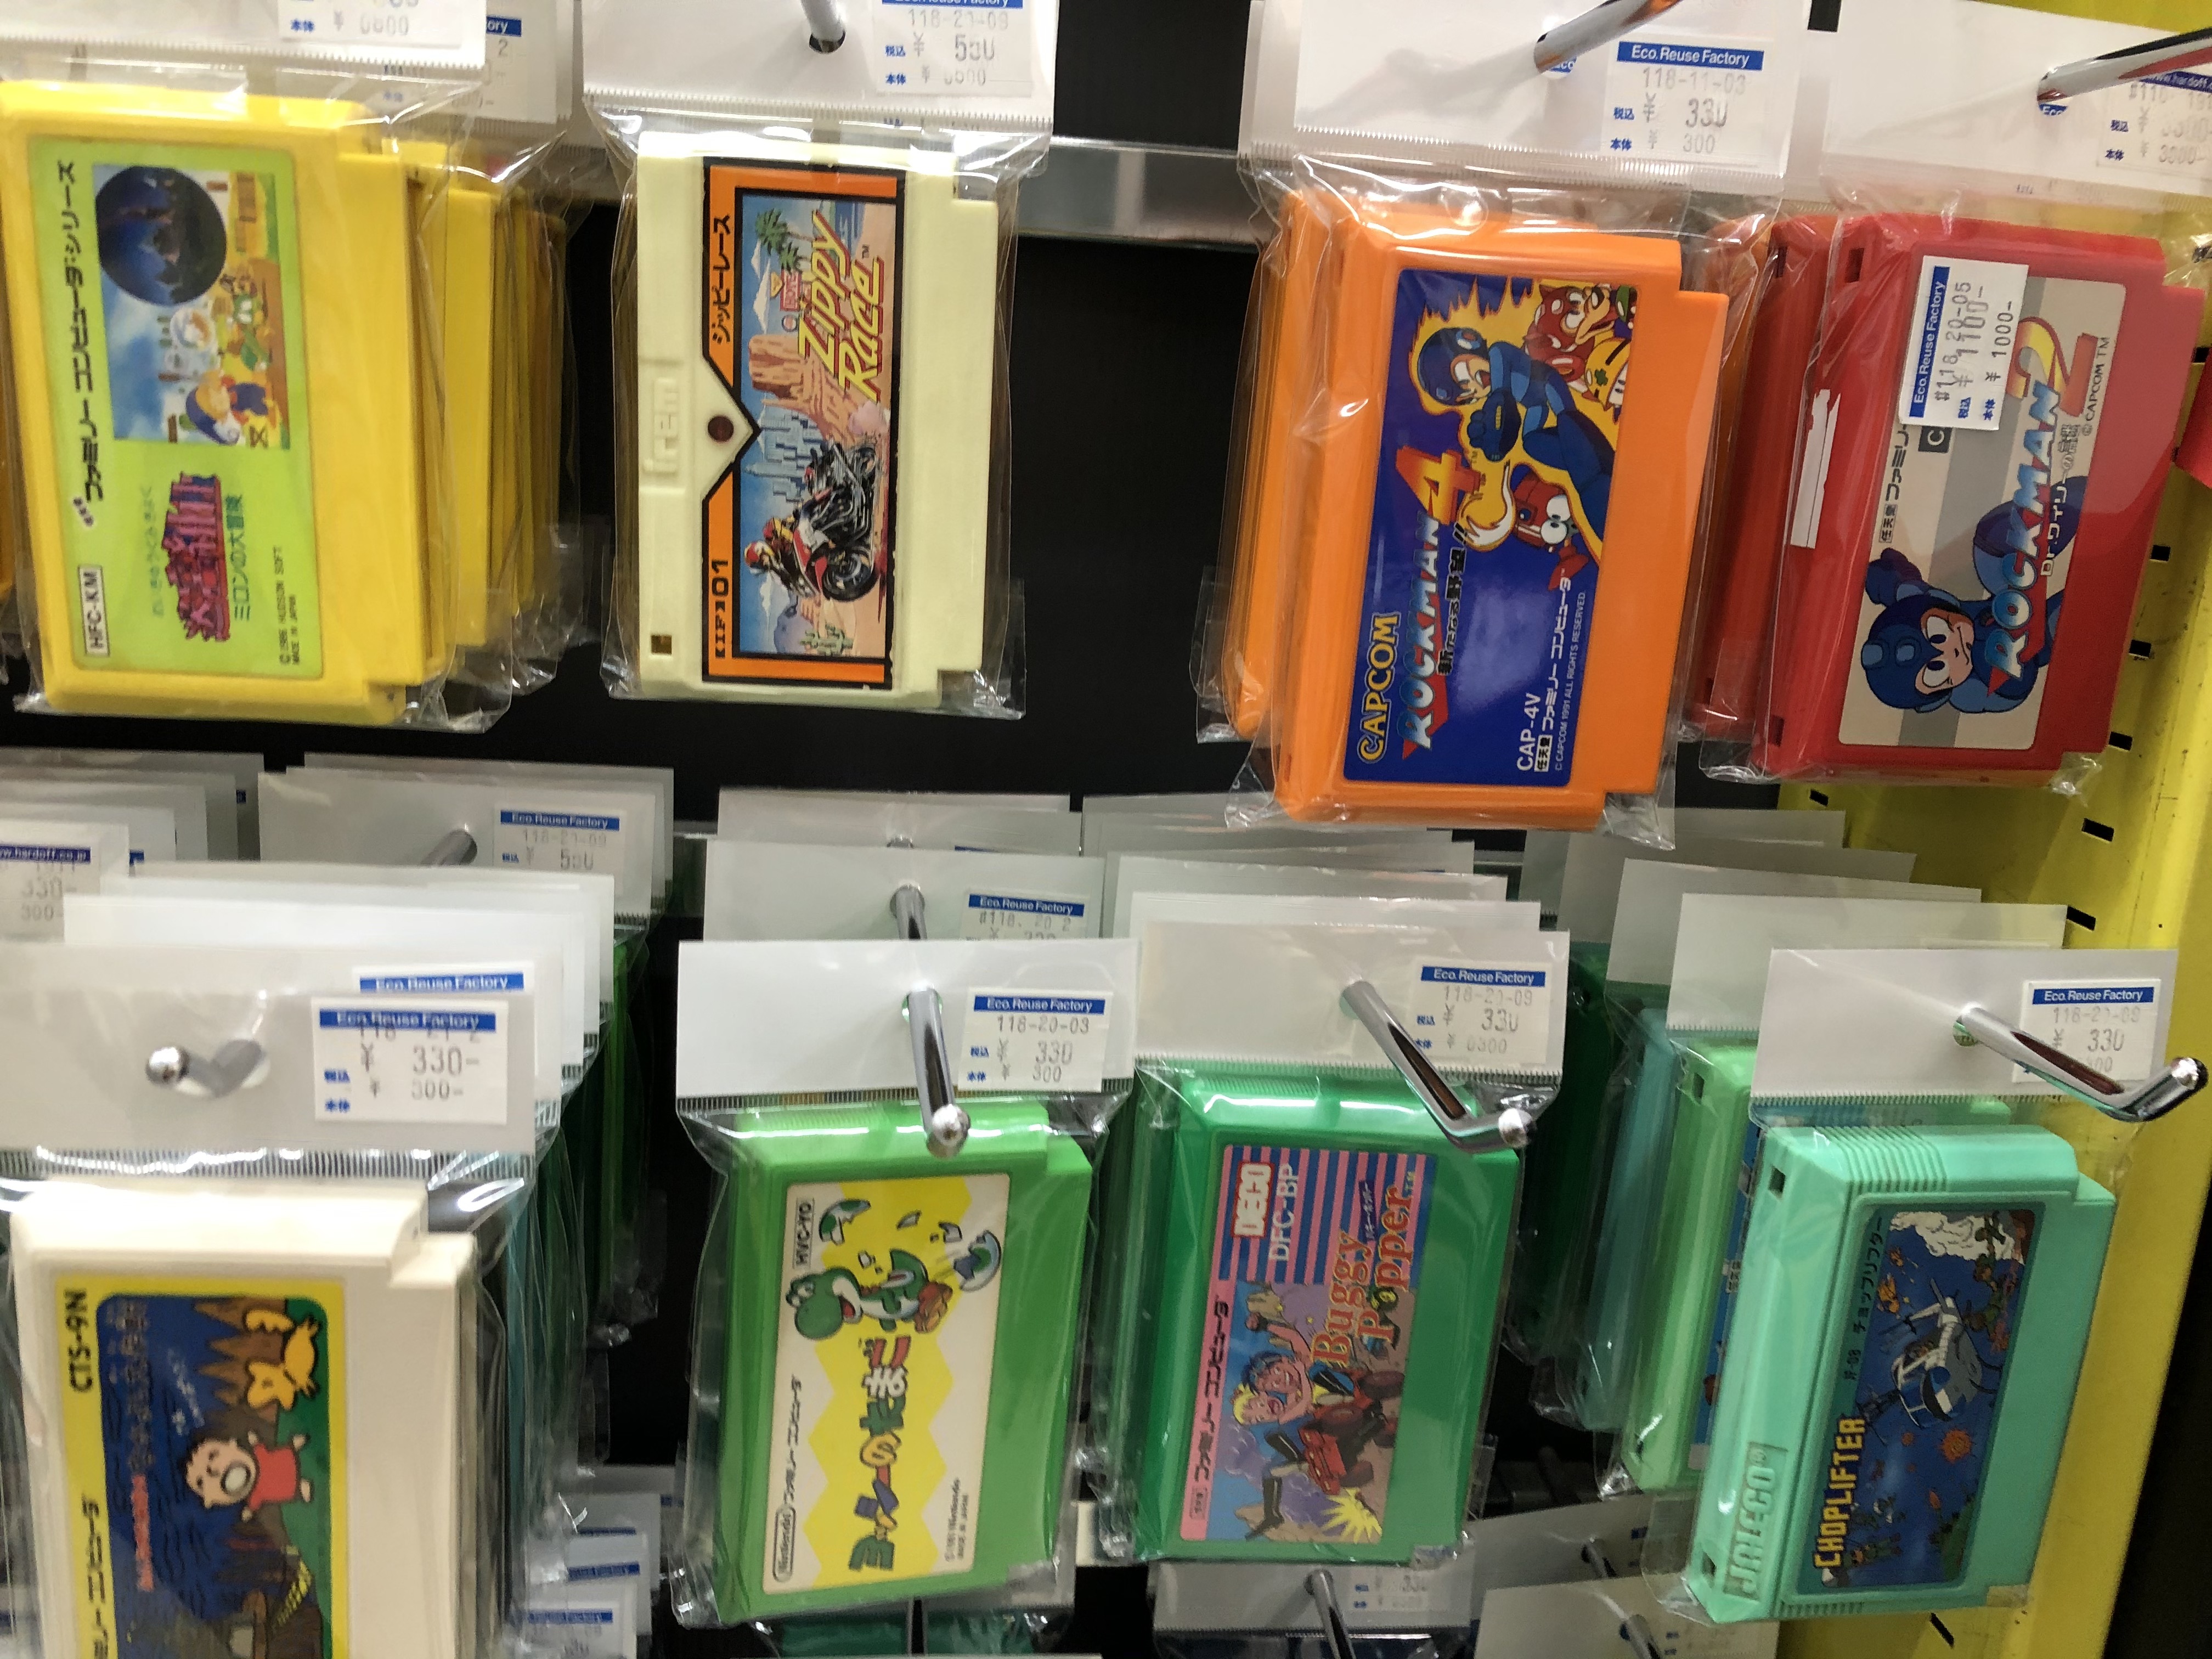 Vintage Famicon game cartridges at Hard Off in Tokyo. Photo by Denisse Rauda.